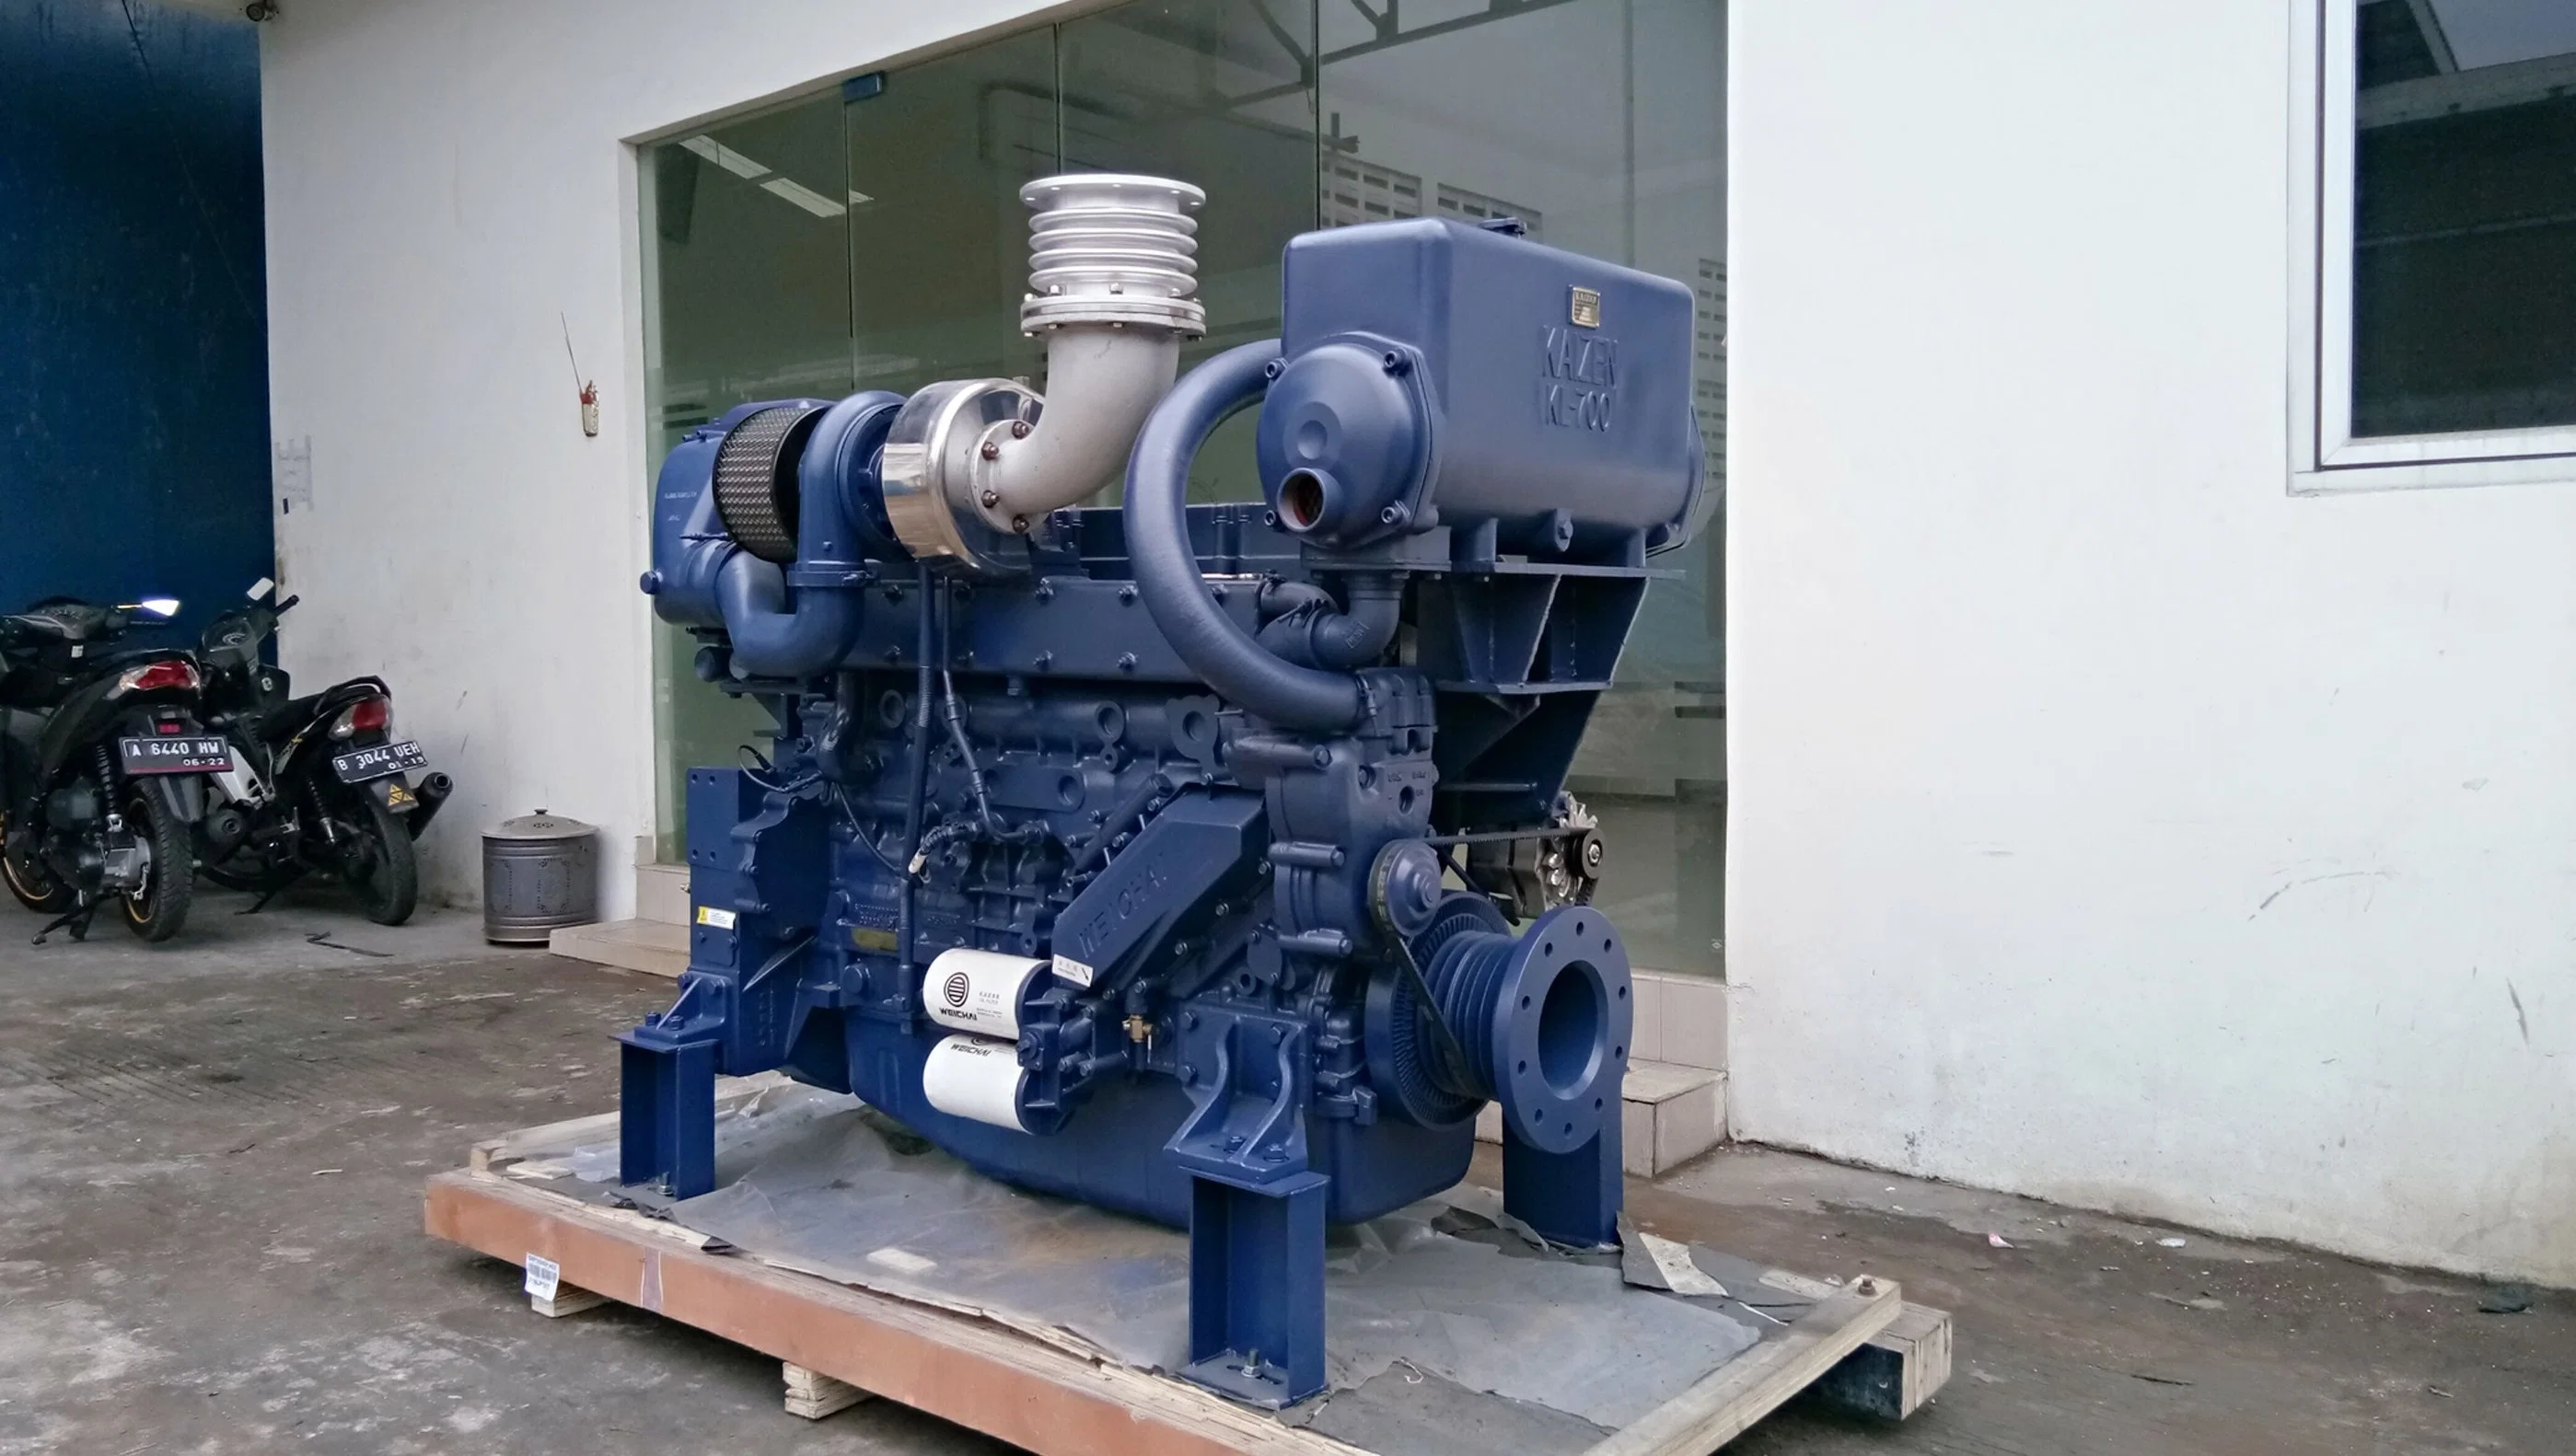 Brand New Water Cooling 6 Cylinders Weichai Wd10 Series Marine Diesel Engine Wd10c250 Boat Engine 4 Stroke for Sale